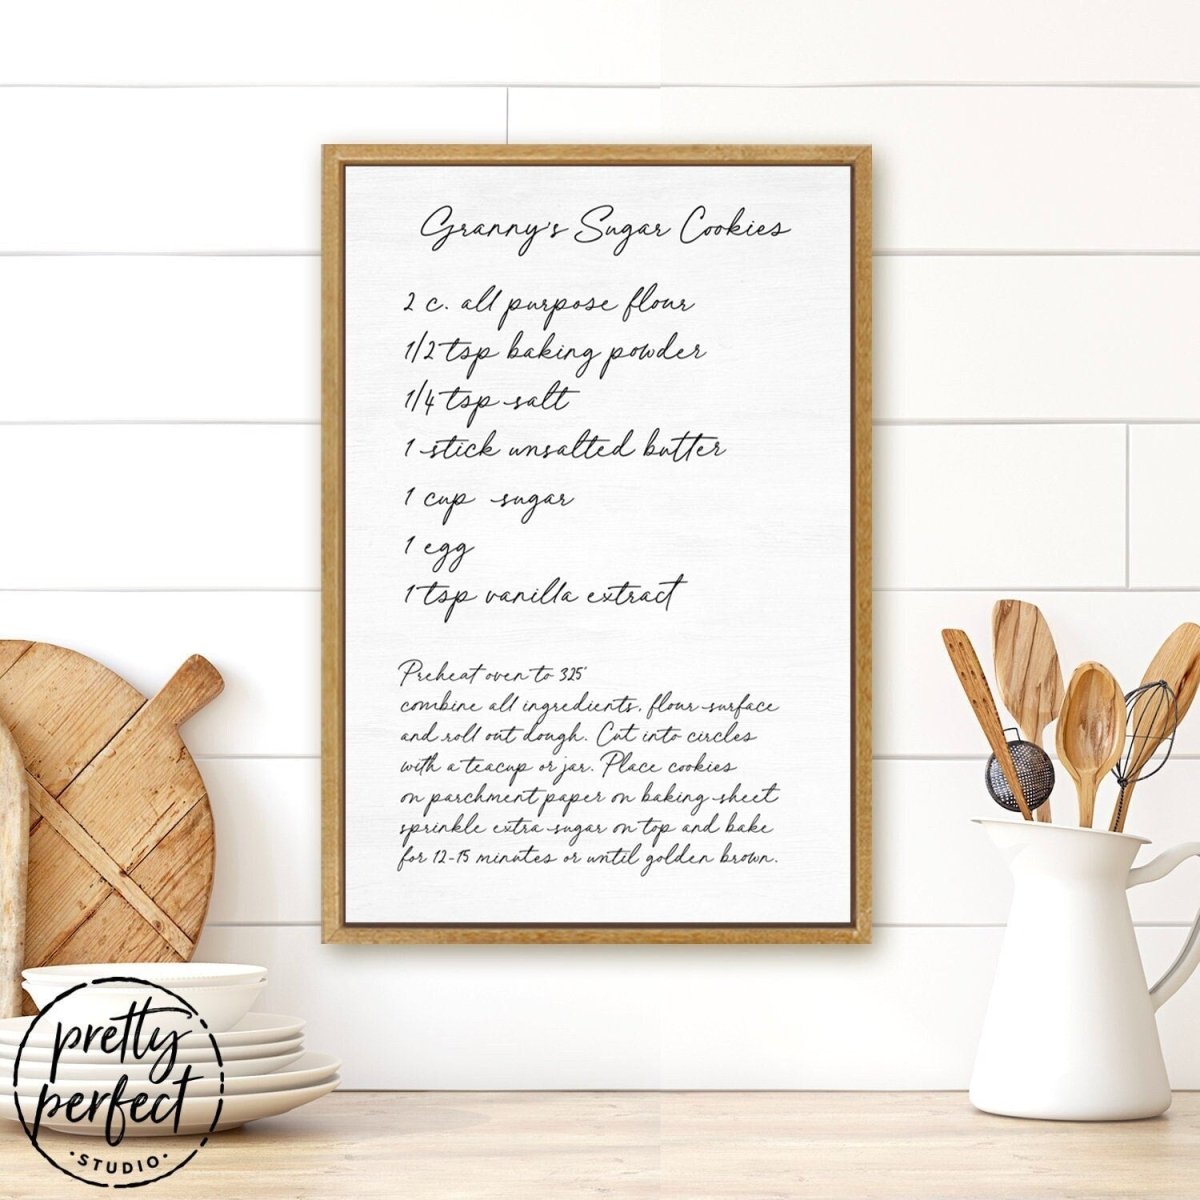 Personalized Family Recipe Sign Hanging in Kitchen on Wall - Pretty Perfect Studio